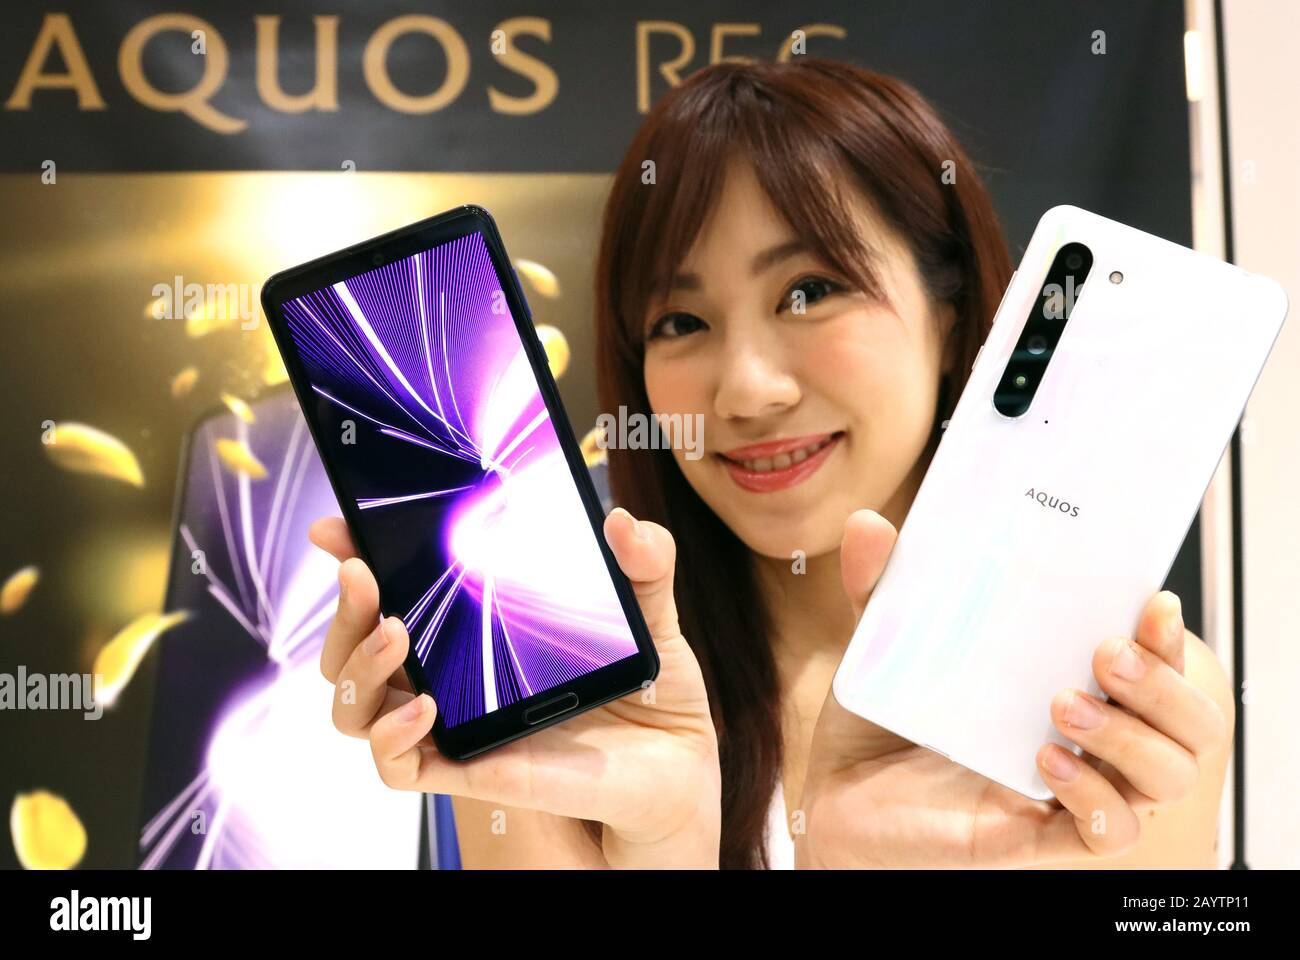 Tokyo, Japan. 17th Feb, 2020. Japan's electronics giant Sharp unveils the new 5G smartphone 'AQUOS R5G' equipped with Qualcomm's Snapdragon 865 on its CPU, 6.5-inch sized IGZO LCD display and three cameras with a 3D sensor at the company's Tokyo office in Tokyo on Monday, February 17, 2020. Sharp will put Japan's first 5G smartphone on the market in this spring. Credit: Yoshio Tsunoda/AFLO/Alamy Live News Stock Photo